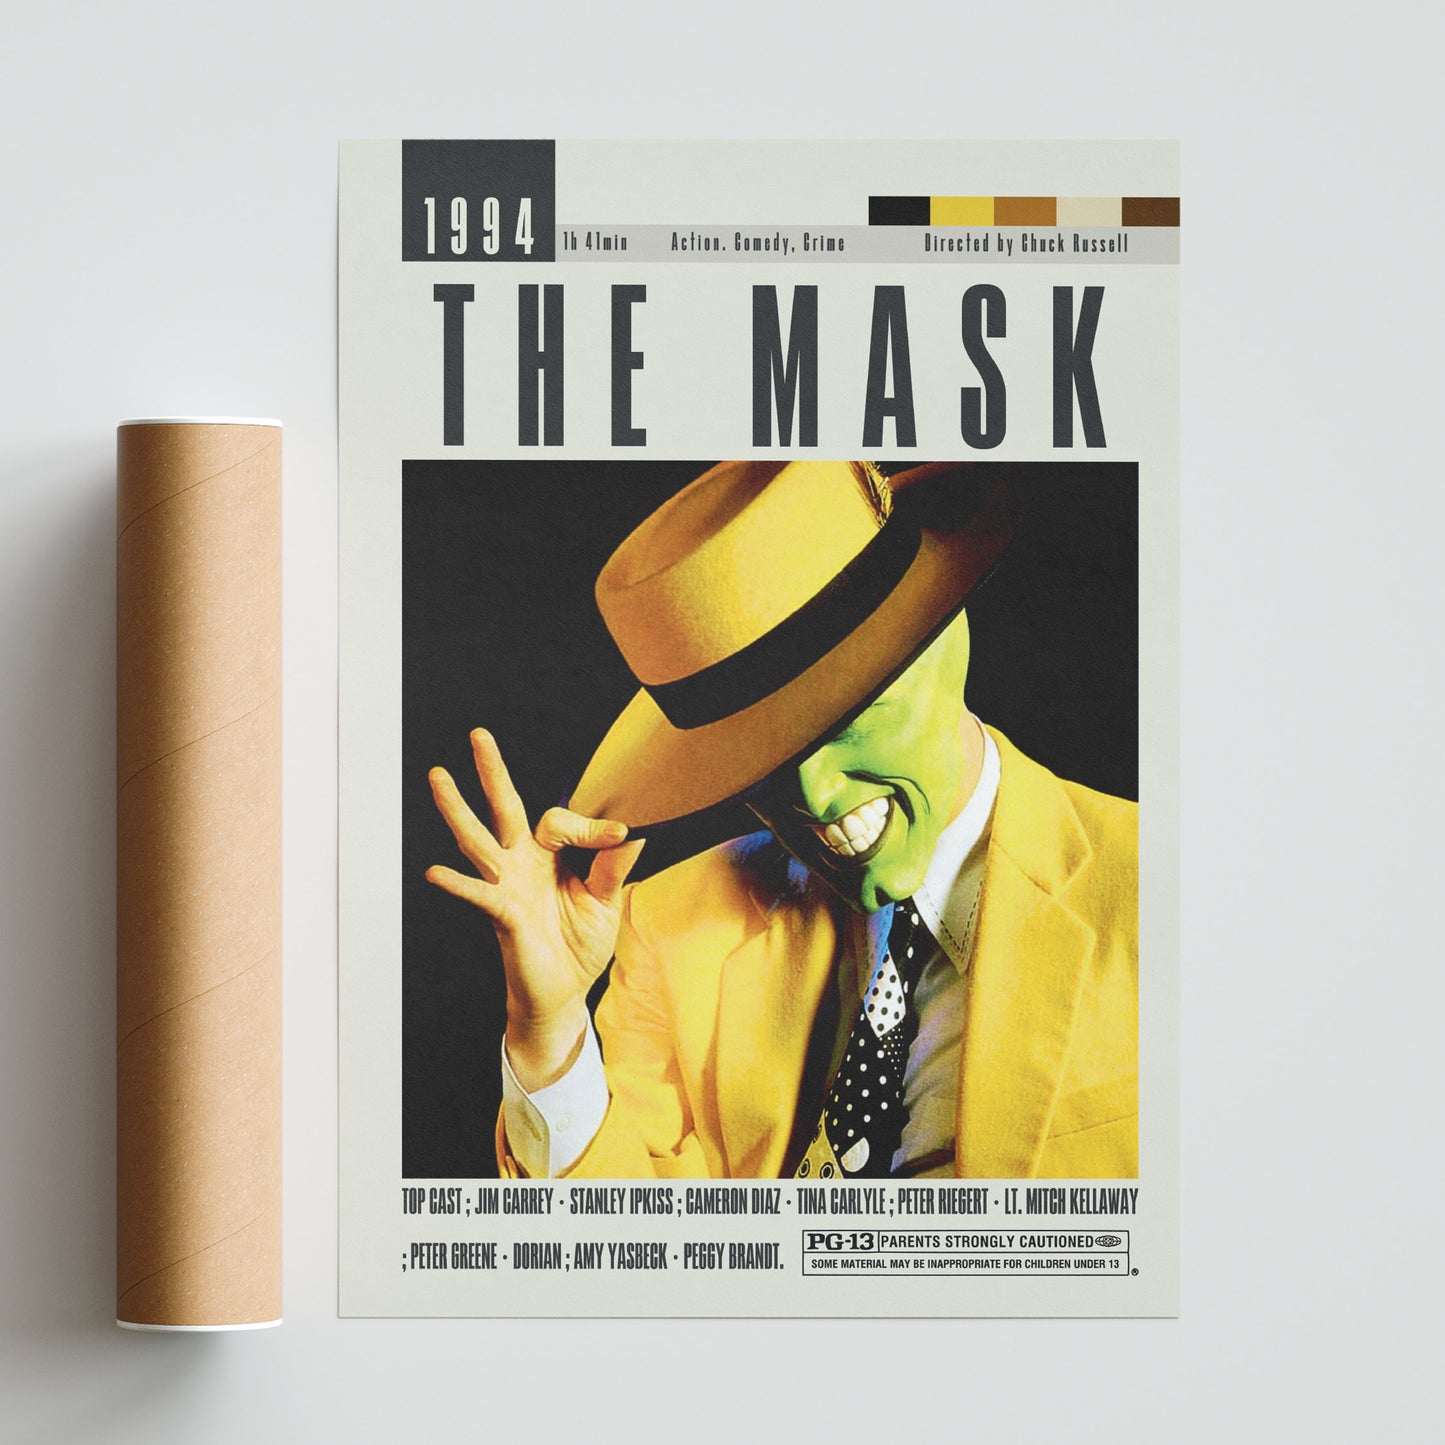 Enhance your movie collection with our exclusive The Mask Poster by Chuck Russell. Made in the UK, these original movie posters are available at an affordable price. Extra large and vintage options add a touch of authenticity to your movie room. Elevate your wall art game with this custom, minimalist retro print.